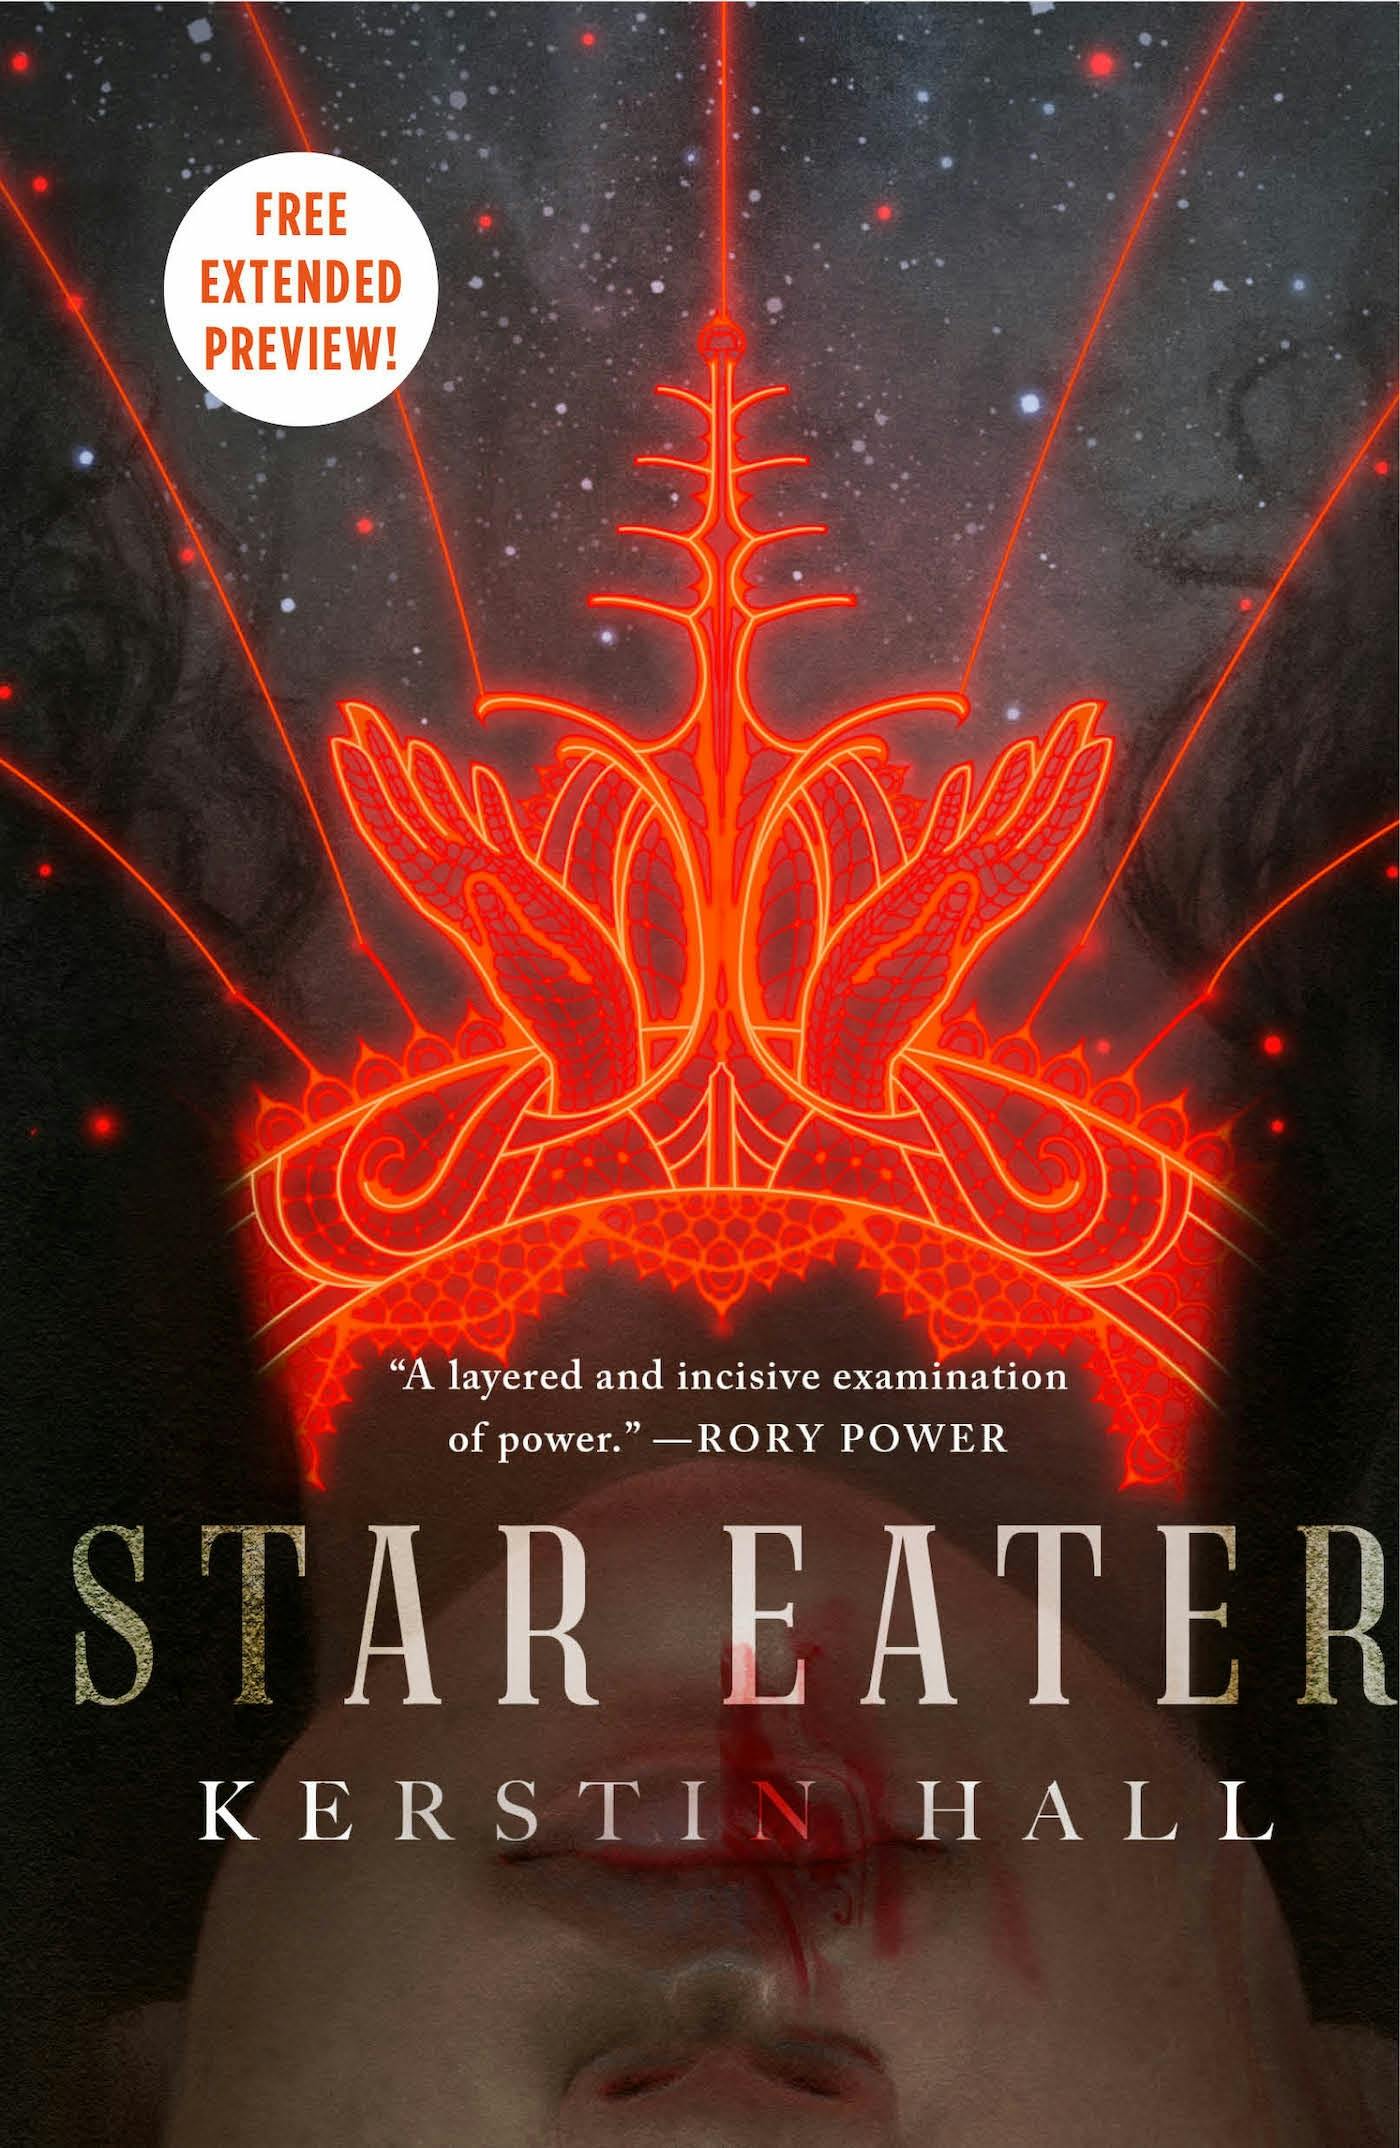 Cover for the book titled as: Star Eater Sneak Peek